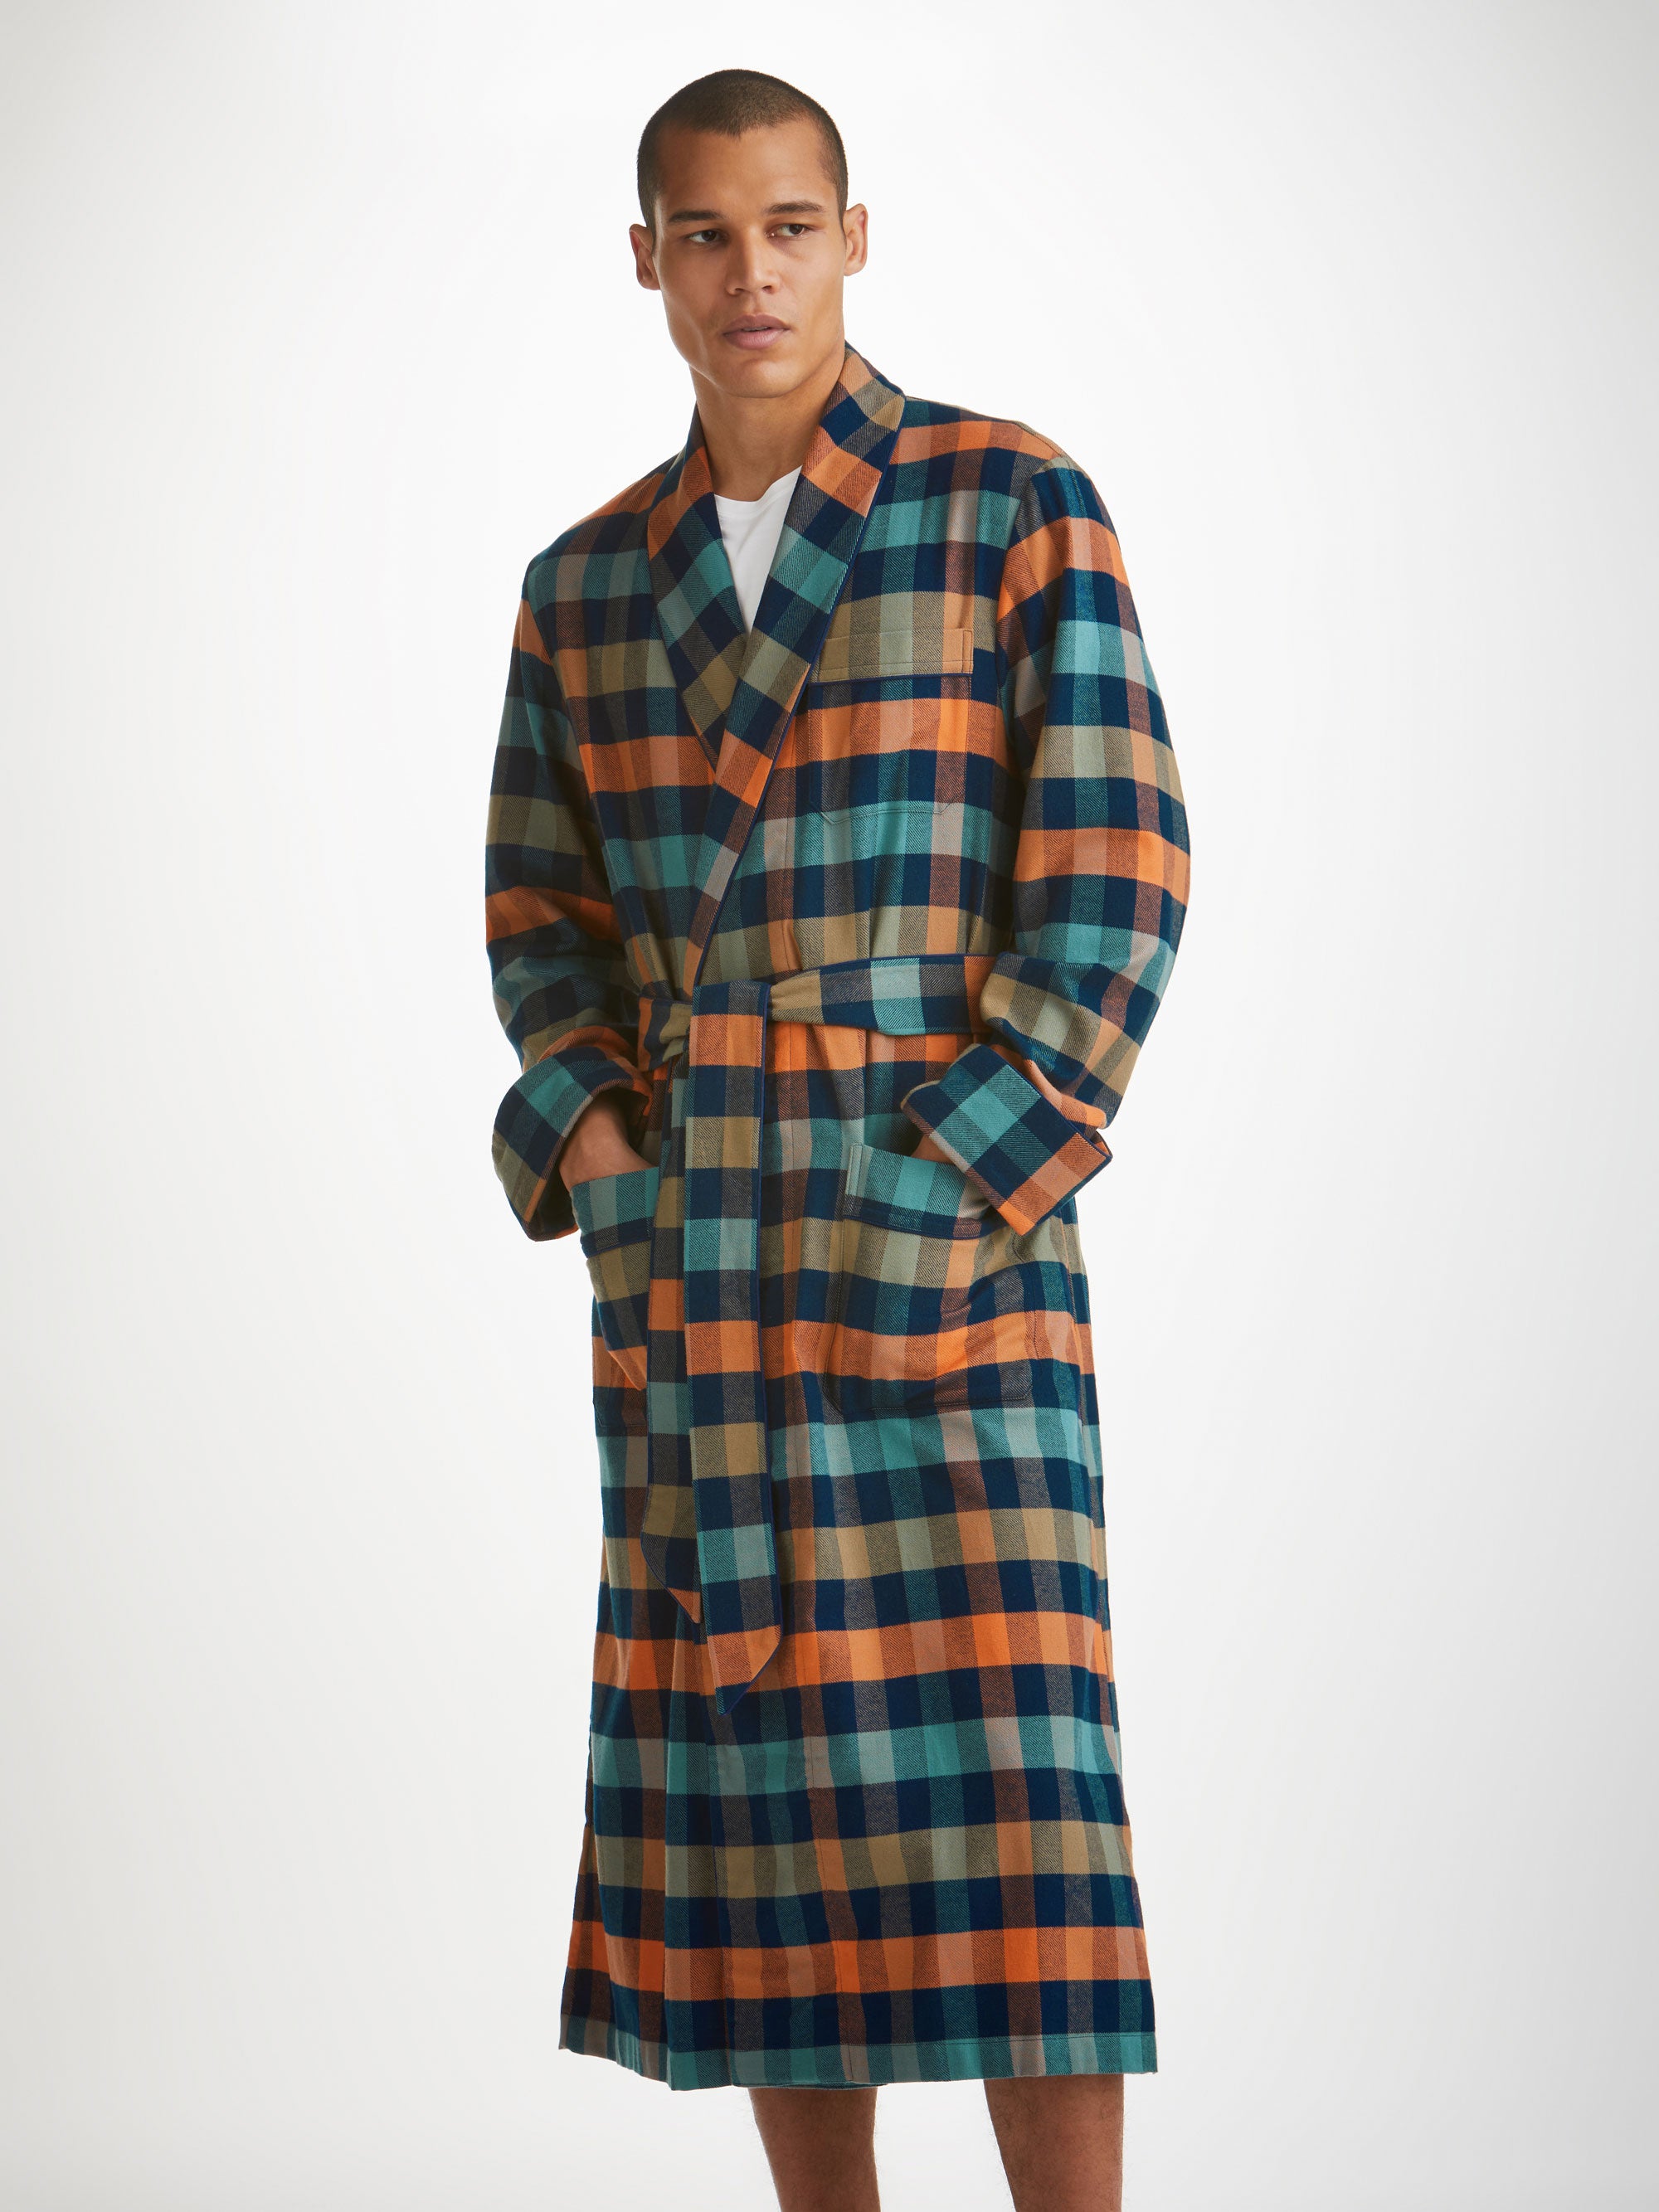 Dressing Gowns on Sale – Bown of London